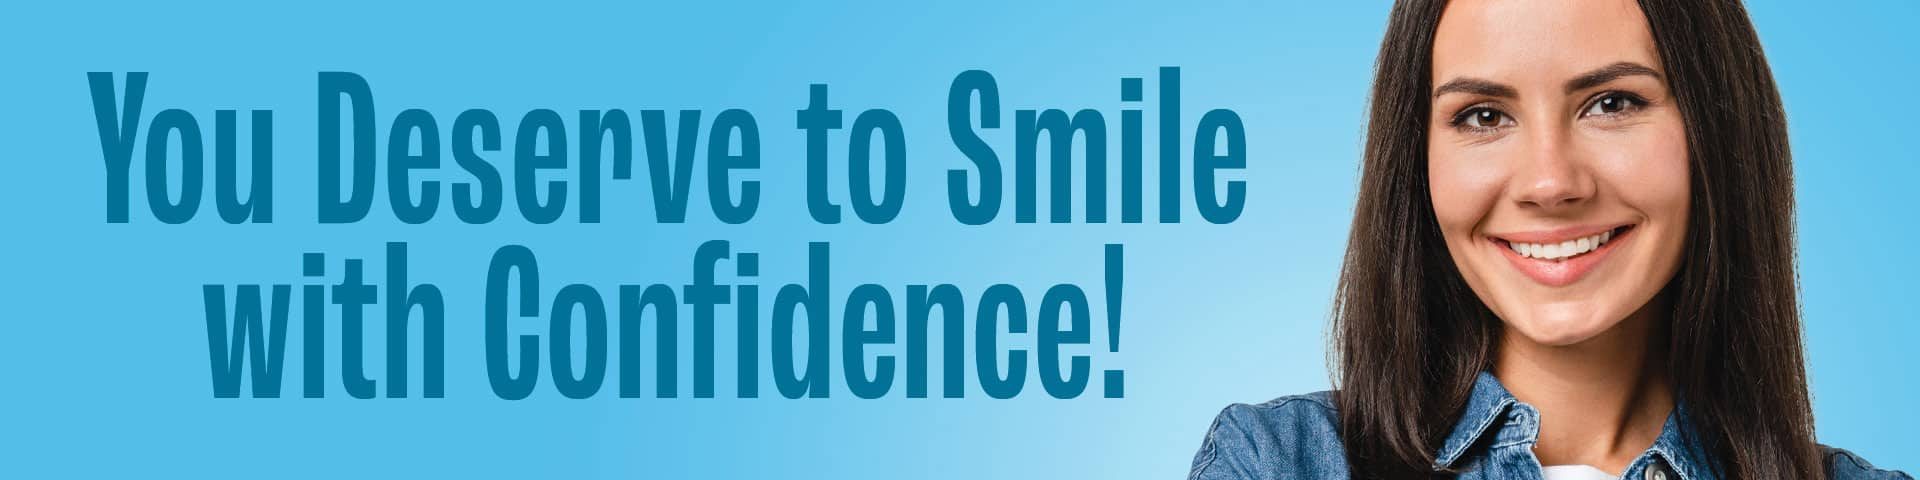 You deserve to smile with confidence!